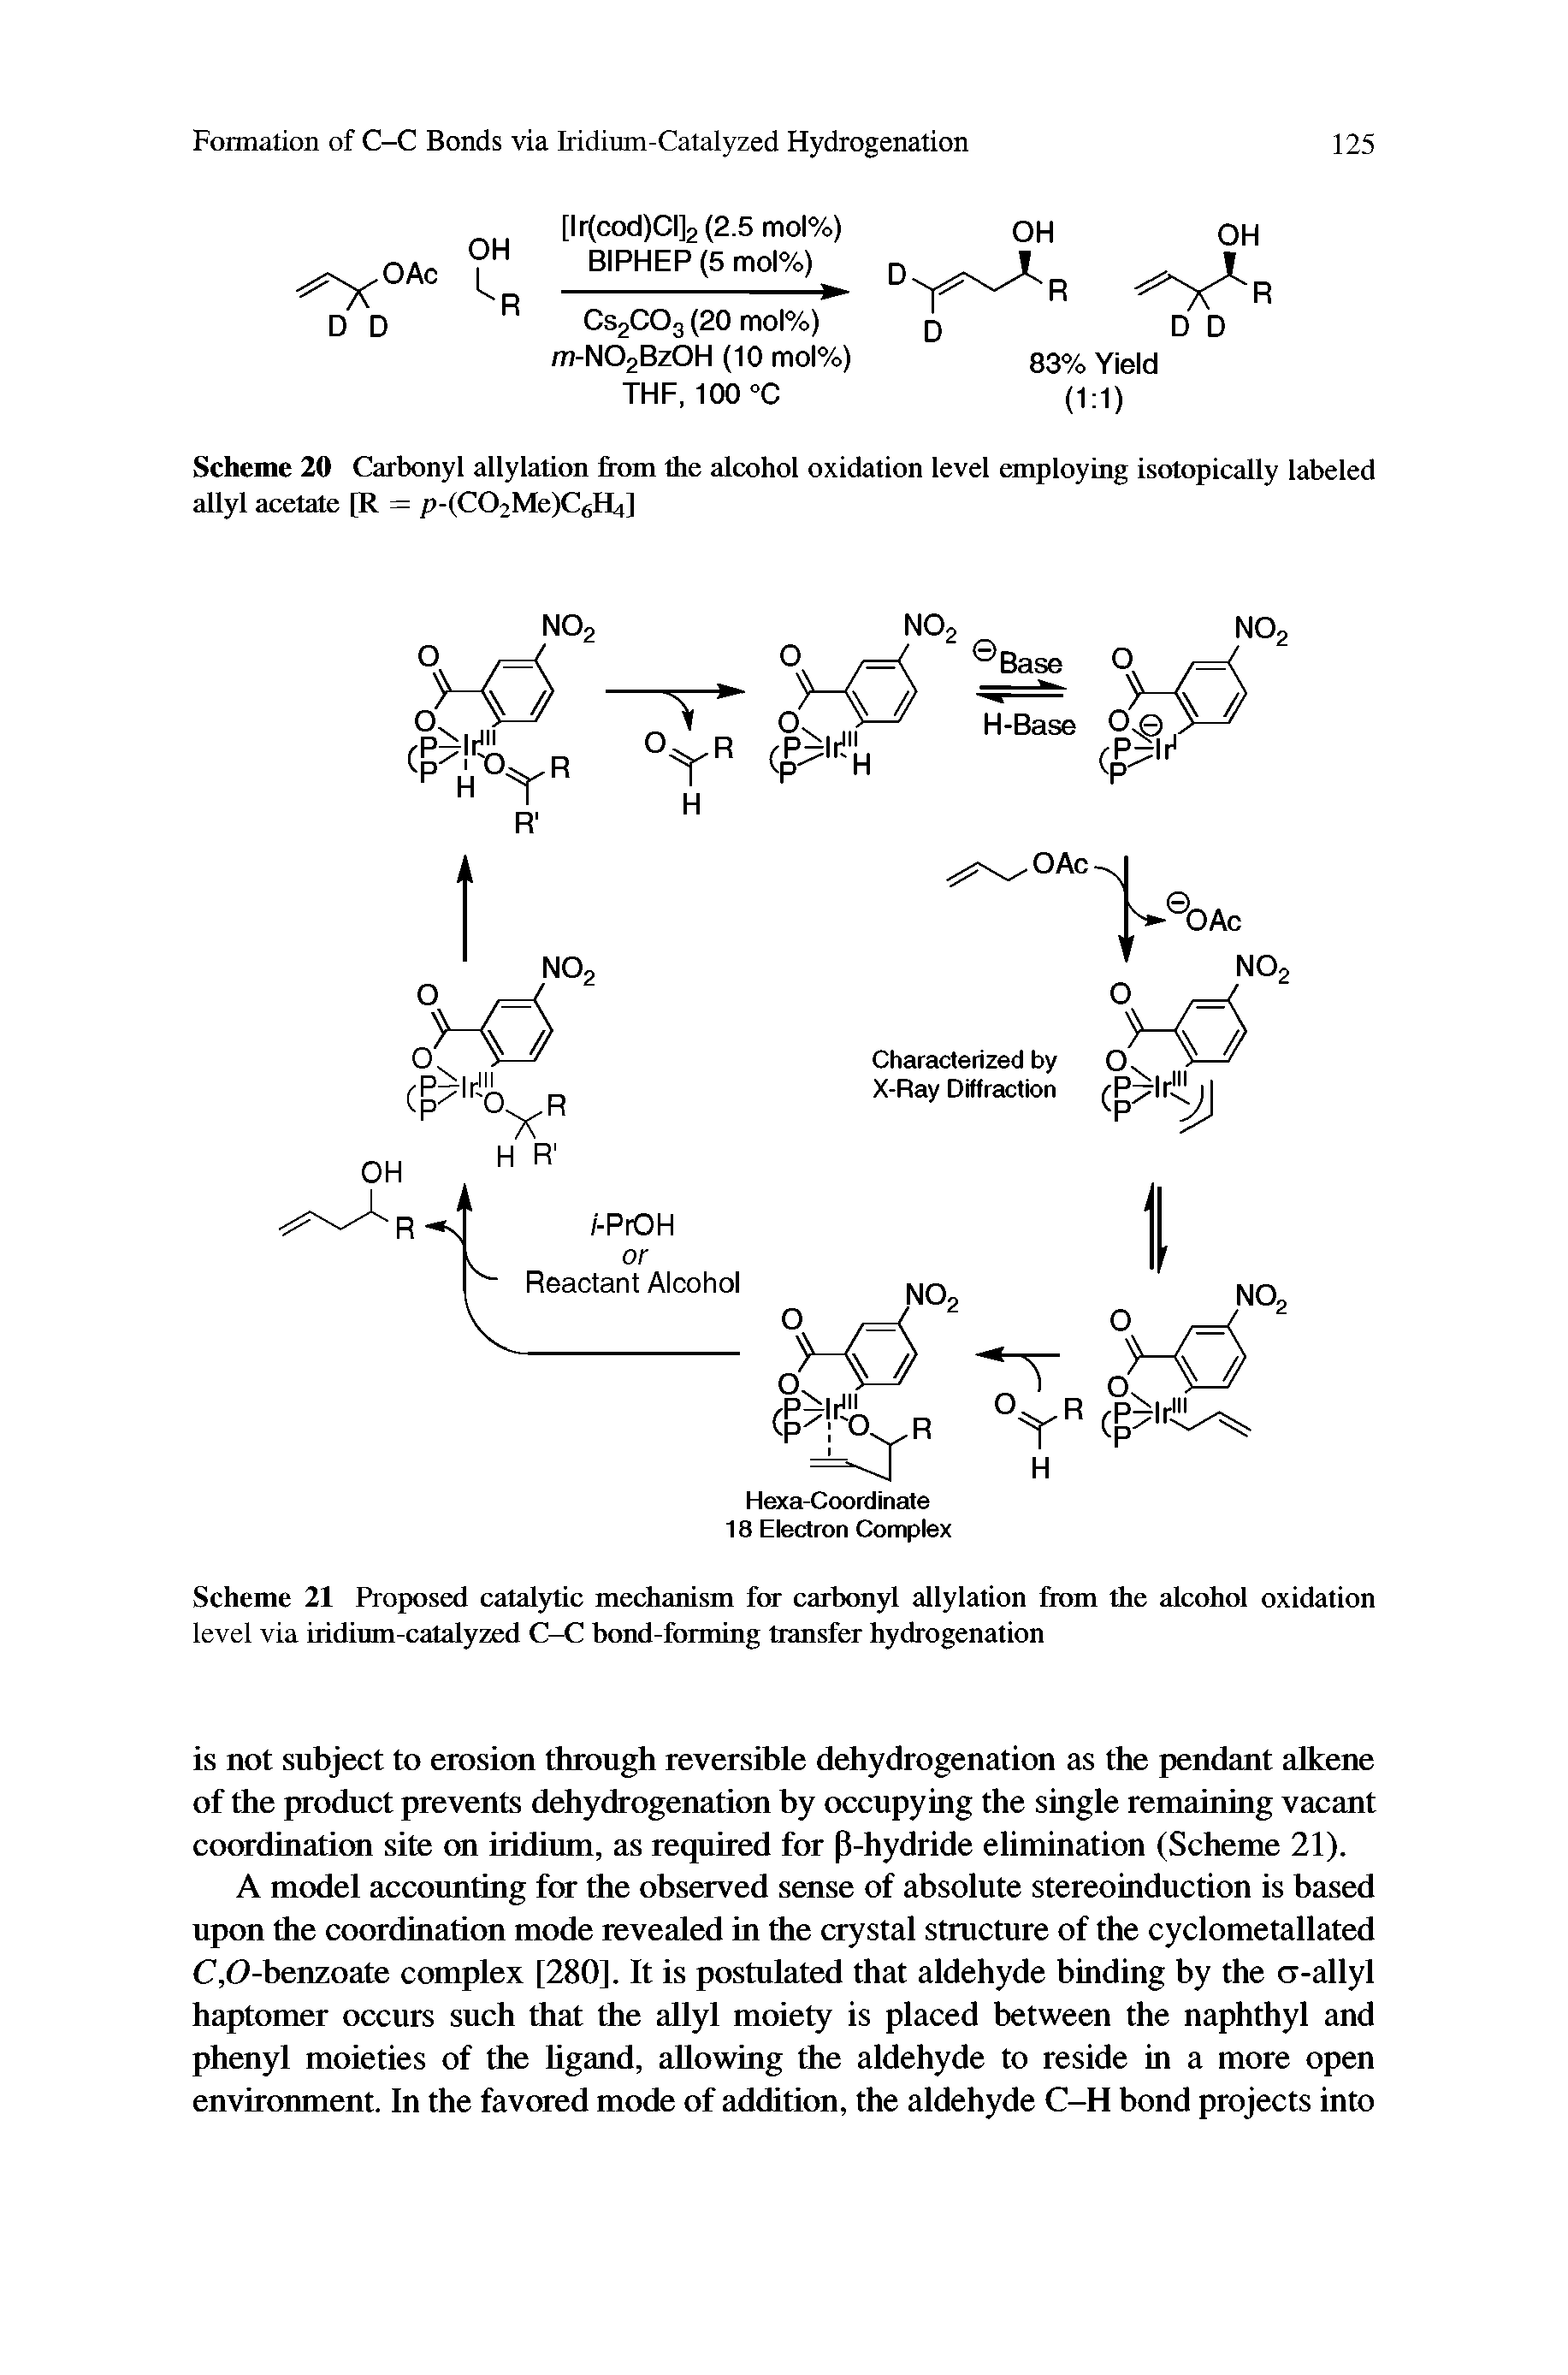 Scheme 20 Carbonyl allylation from the alcohol oxidation level employing isotopically labeled allyl acetate [R = p-(C02Me)C6H4]...